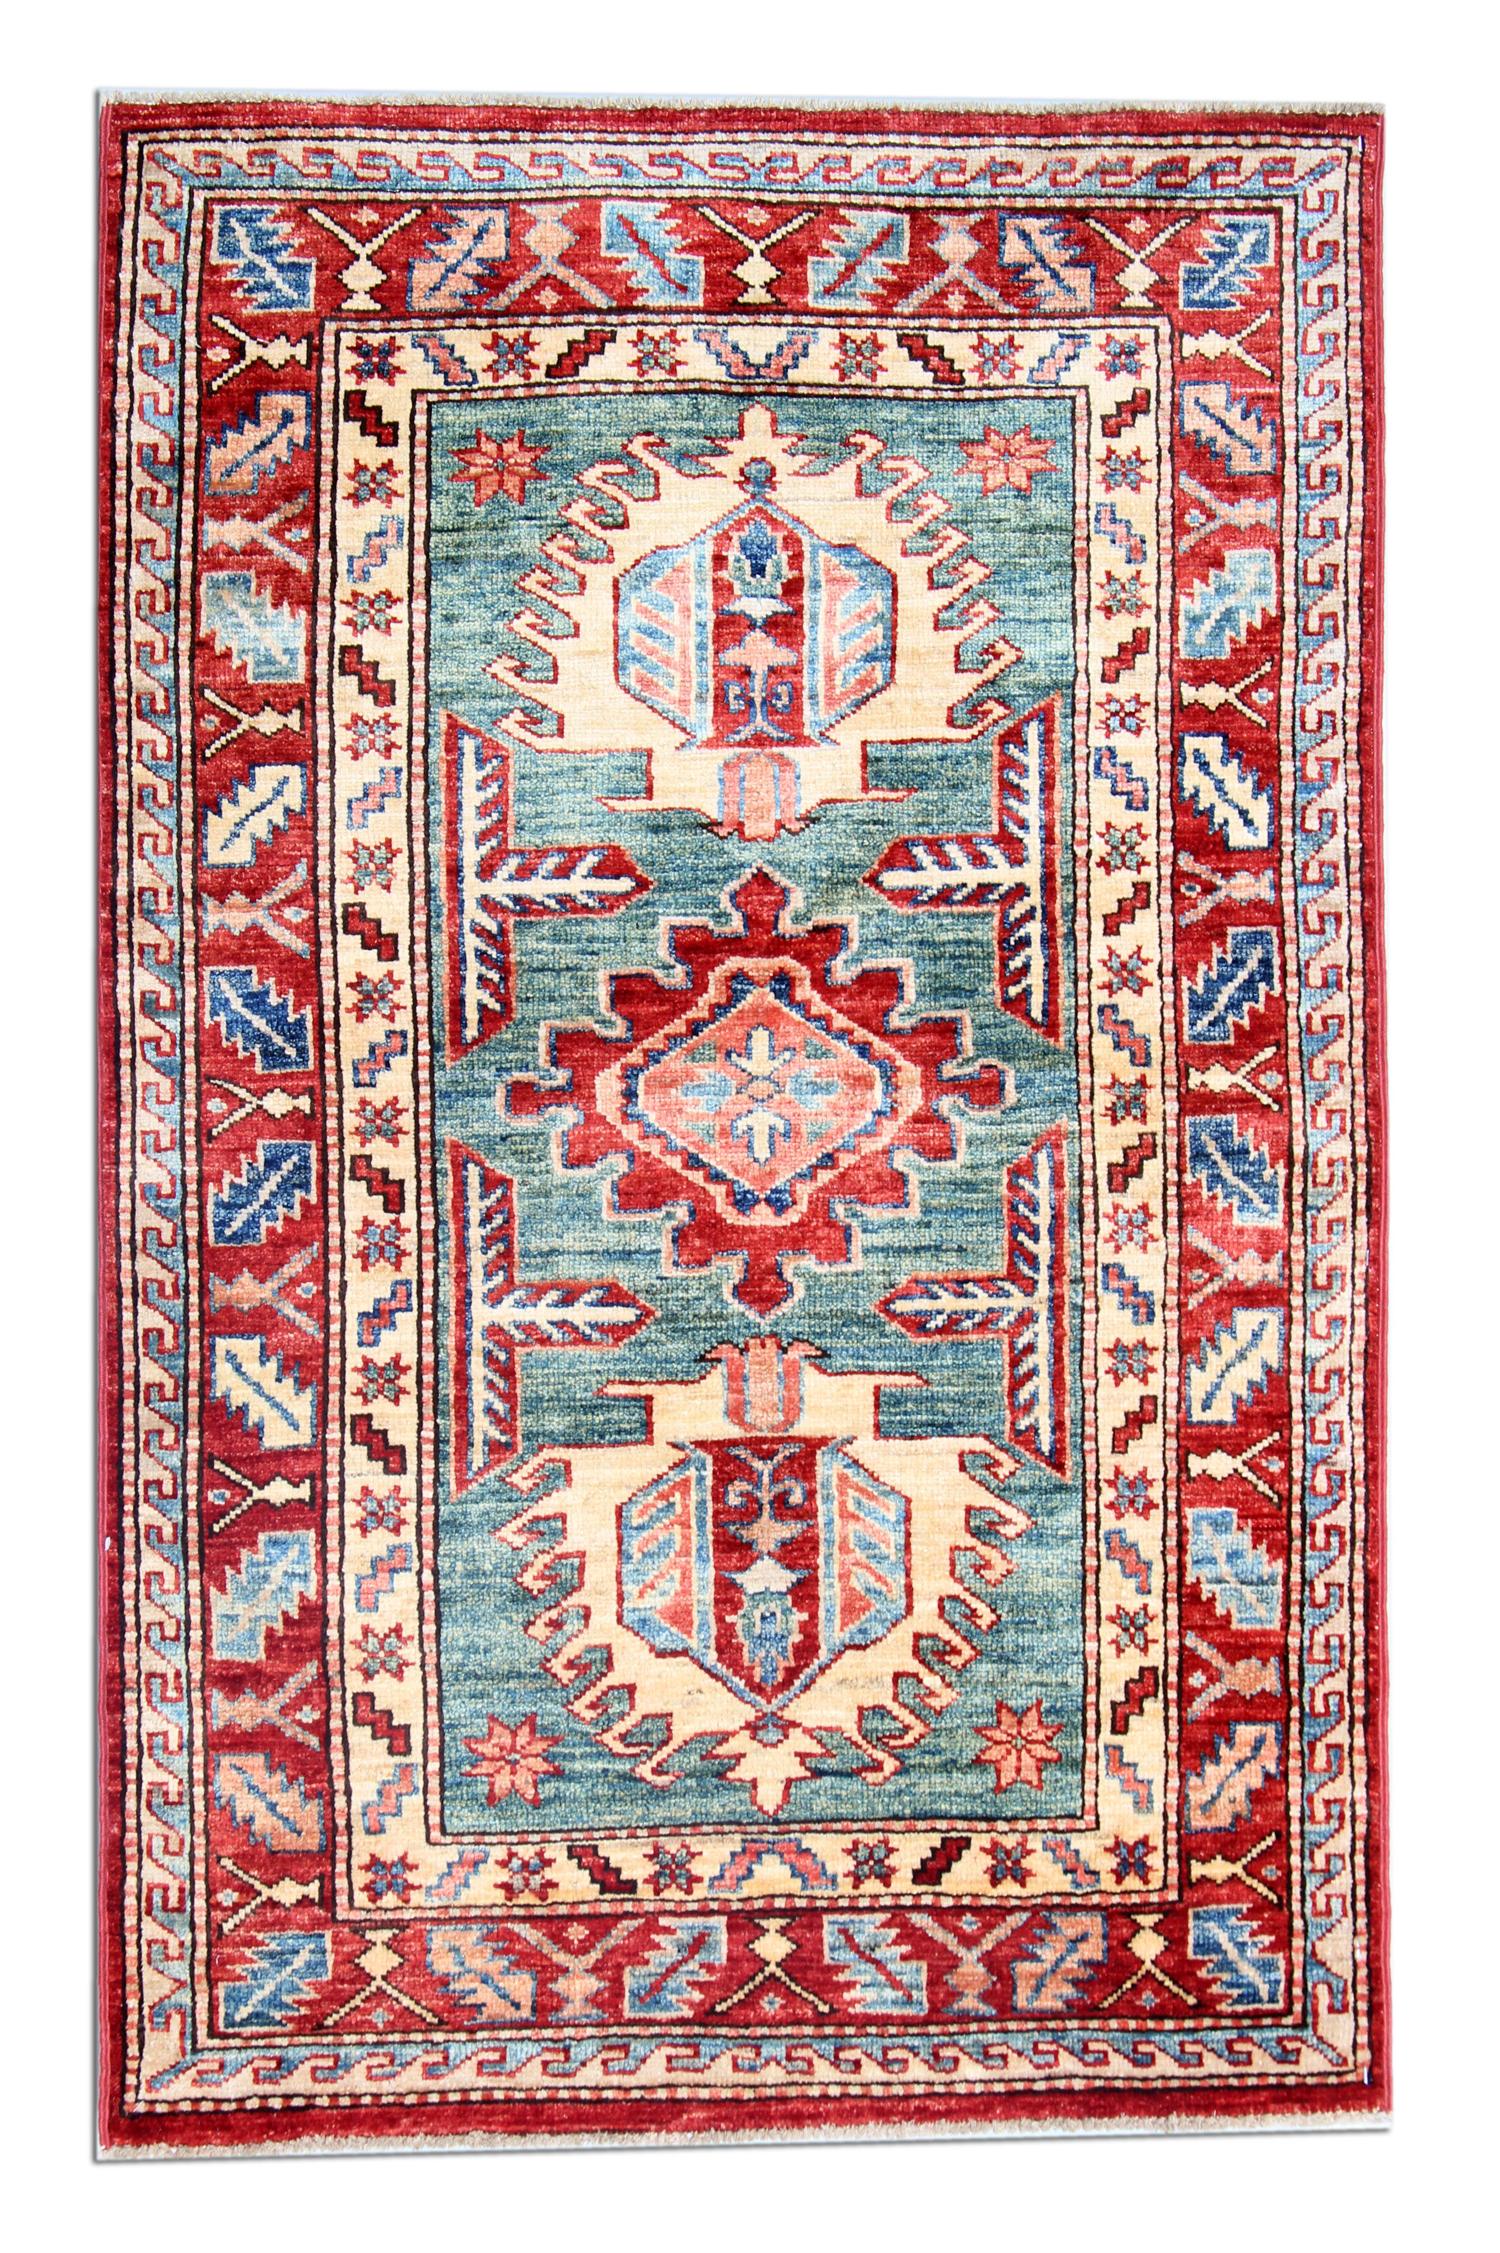 These new green handmade rugs feature designs from the Kazak region in Caucasia. A conventional tribal rug is famous in the part of Kazak Area. Afghan weavers have made this handwoven rug of quality handspun wool and cotton. This high-quality carpet